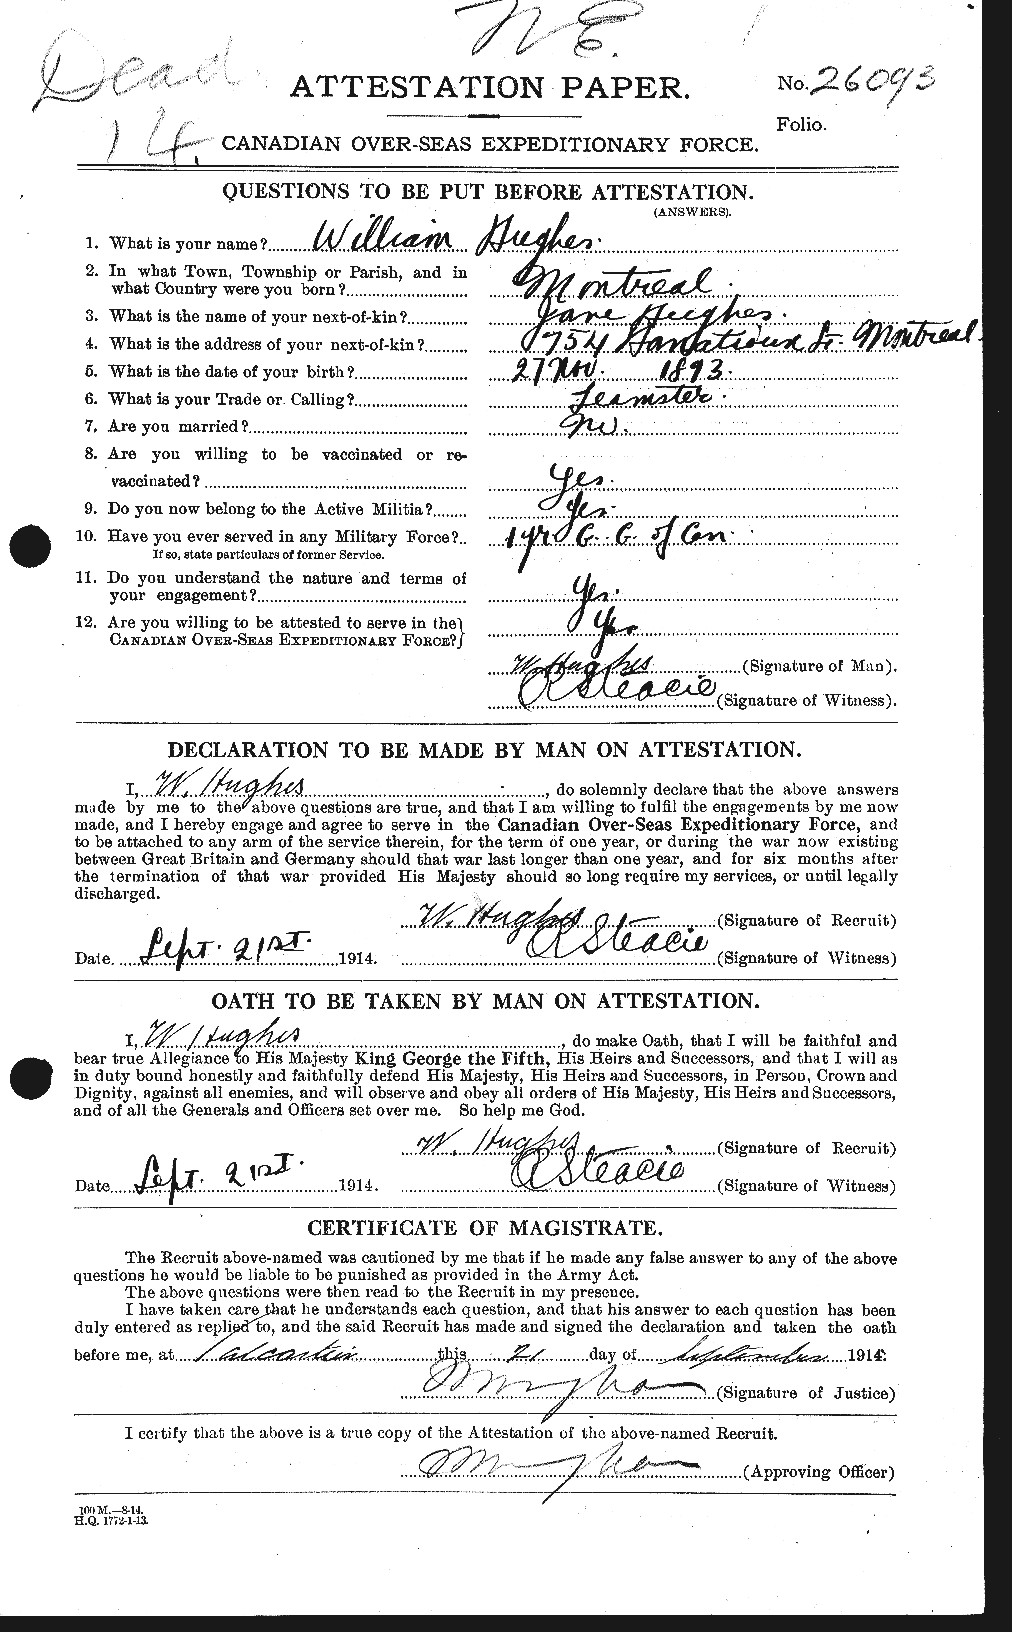 Personnel Records of the First World War - CEF 405881a